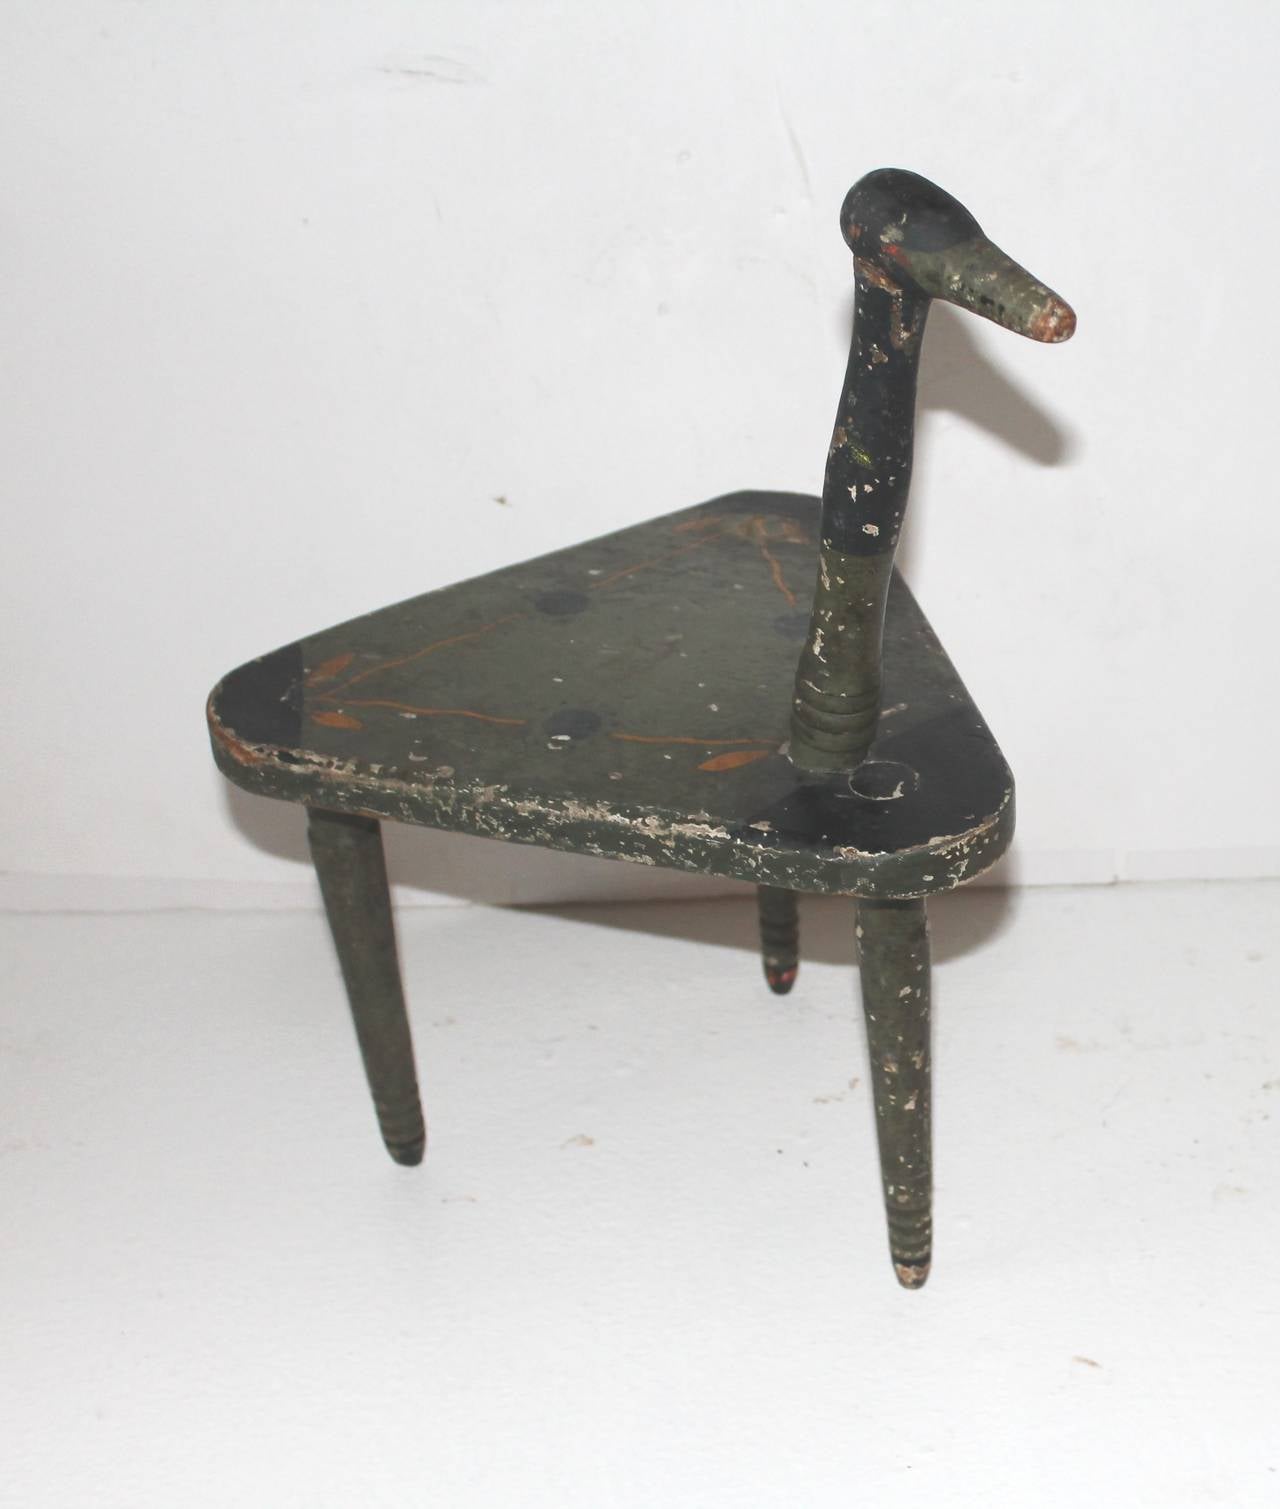 This we believe to be a child's chair with the ducks neck being a thing to hang on to. It has such a crazy folky look to it. It is signed France on the base. What a great piece of Folk Art. The condition is good and sturdy with minor paint loss from